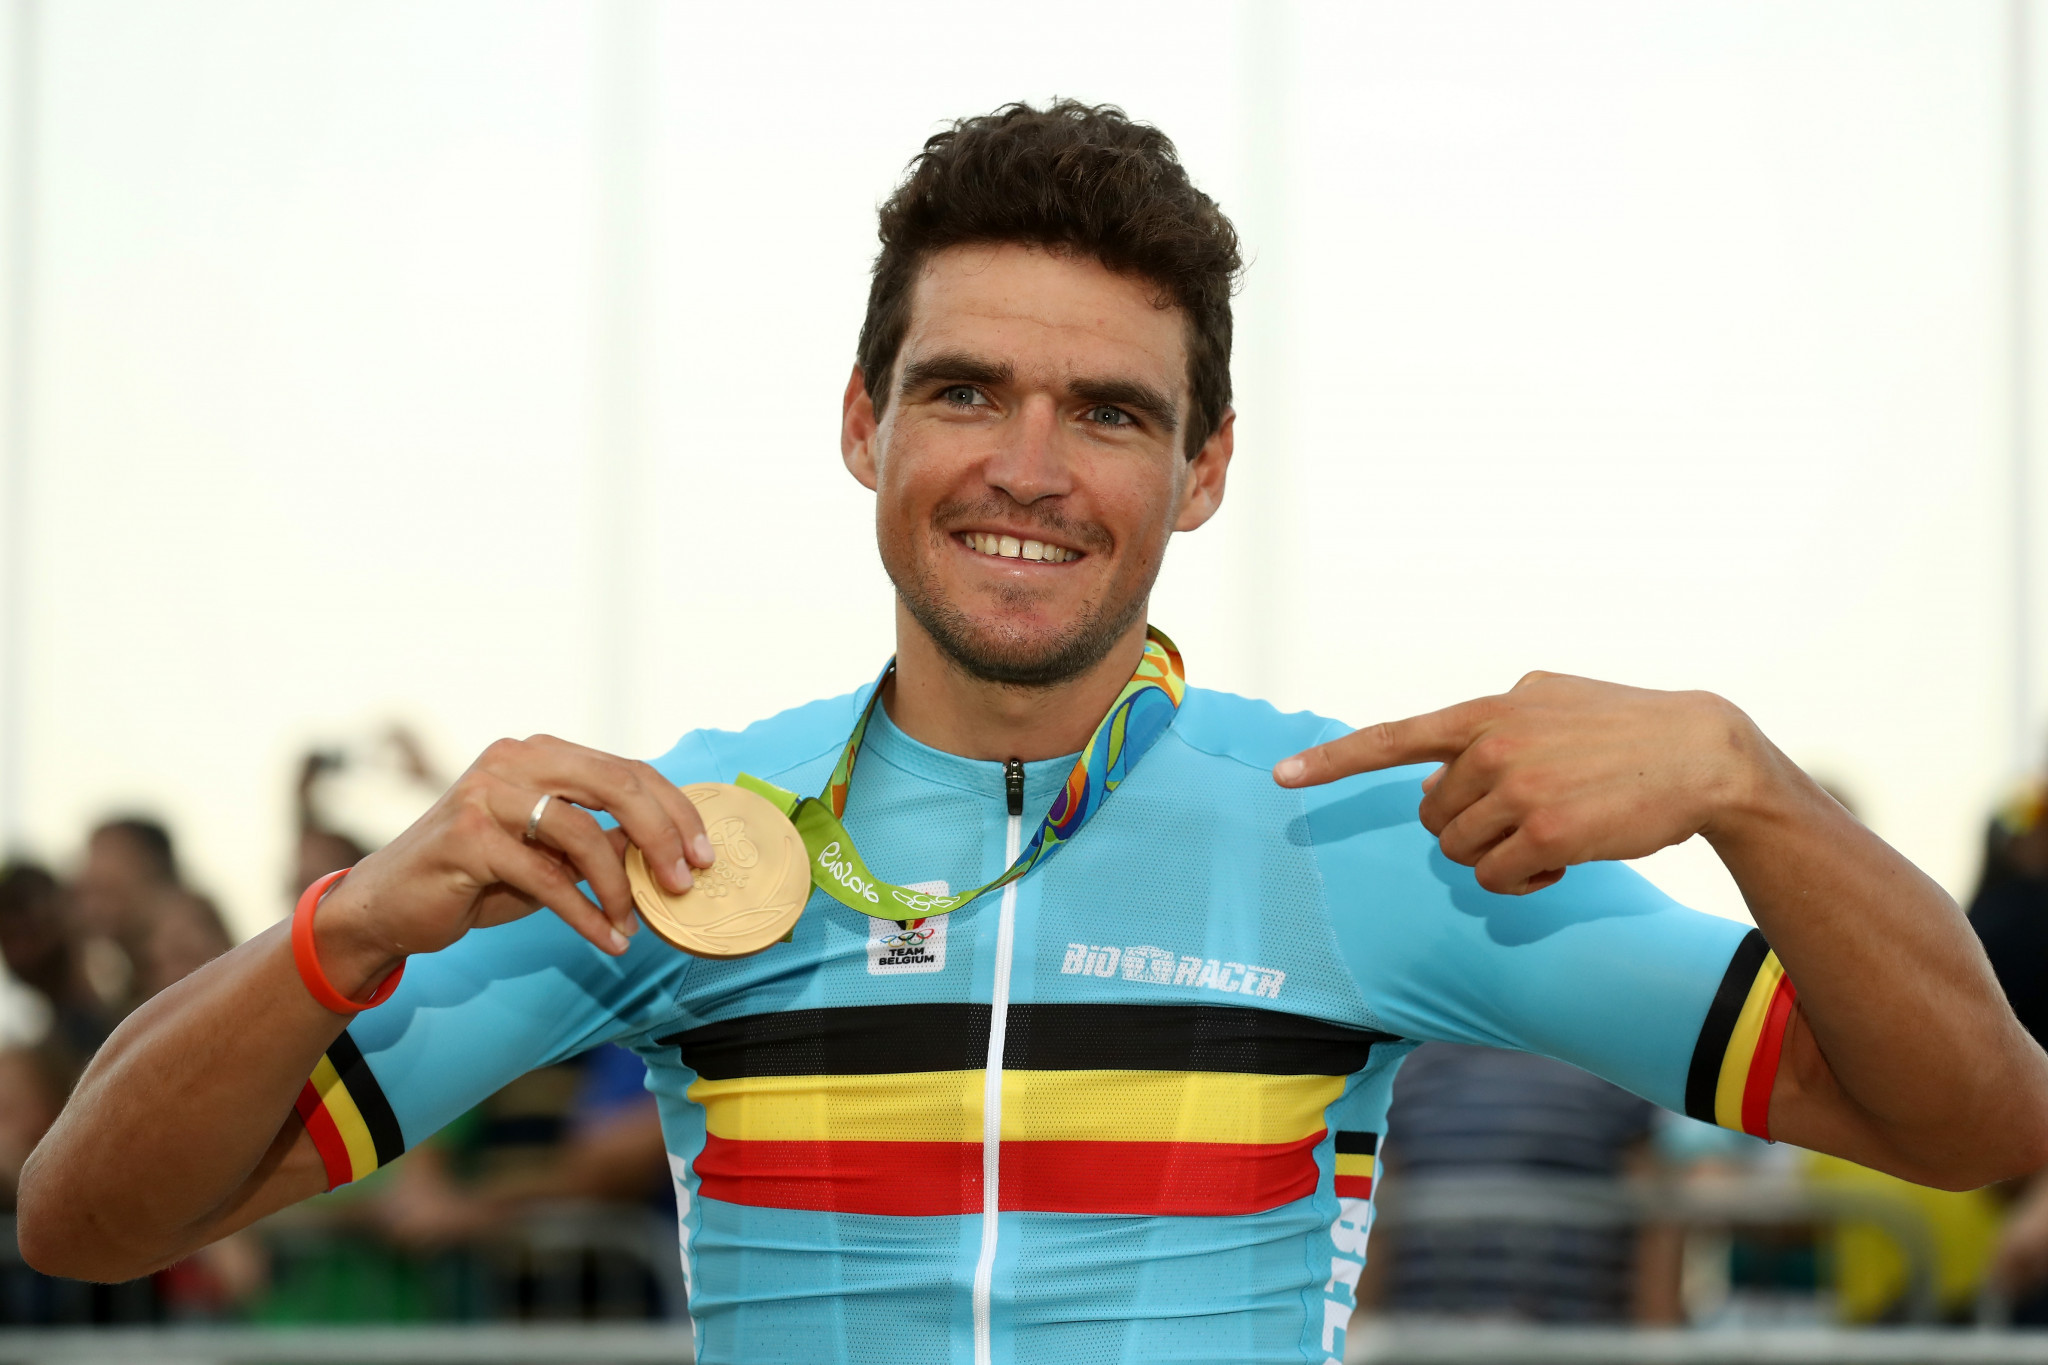 Greg Van Avermaet won the men's road race event at Rio 2016 ©Getty Images